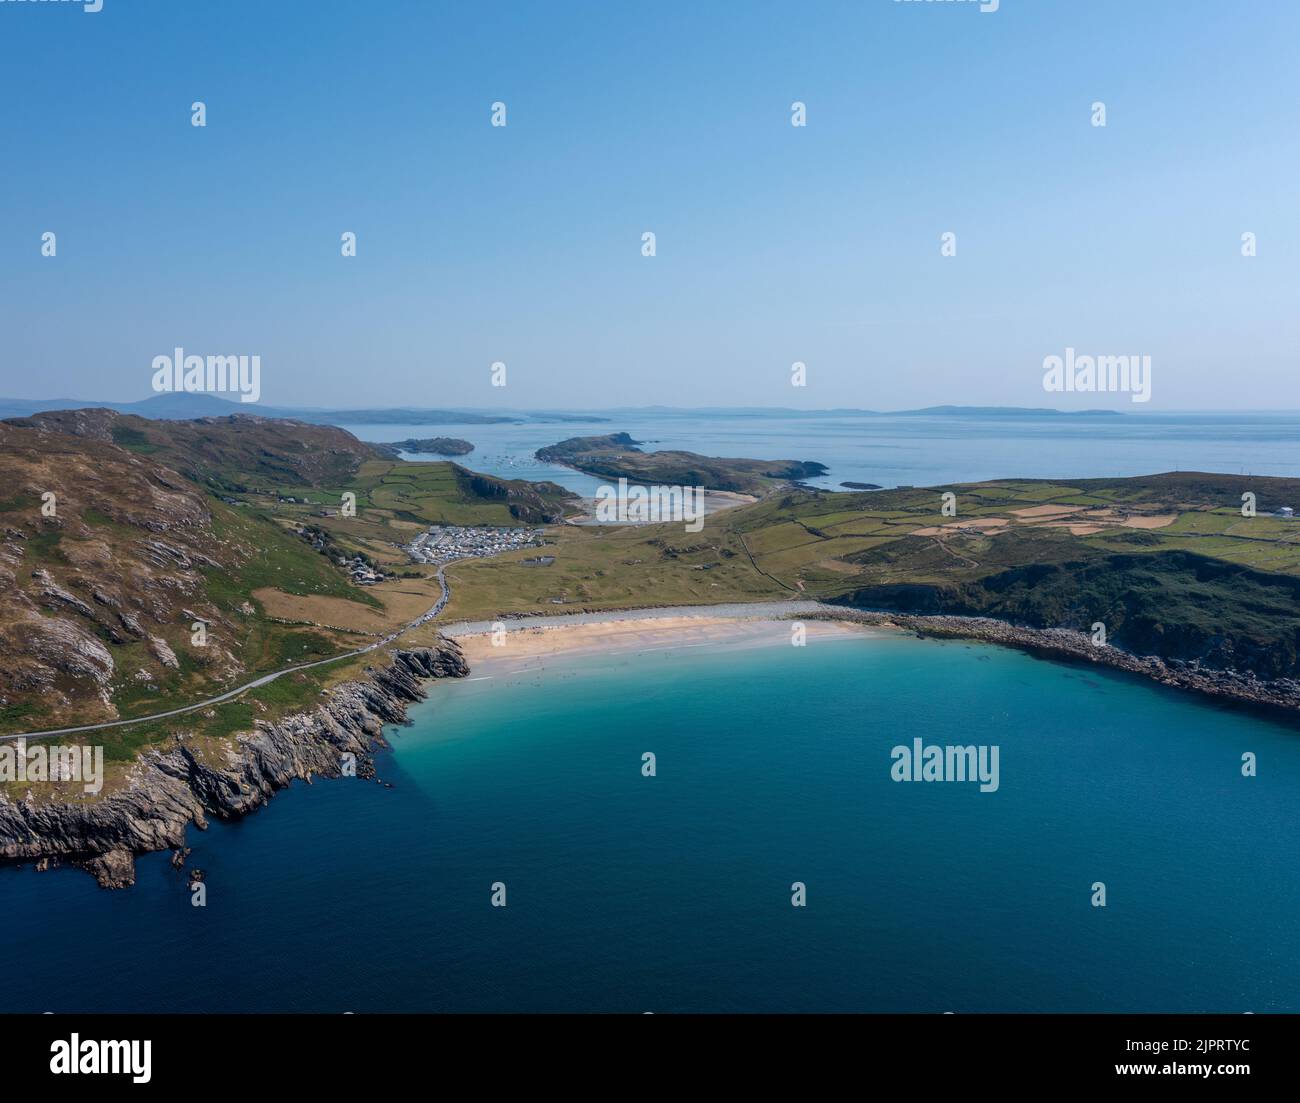 An aerial view of Lackenakea Bay Beach in Barley Cove on the Mizen Peninsula of West Cork in Ireland Stock Photo